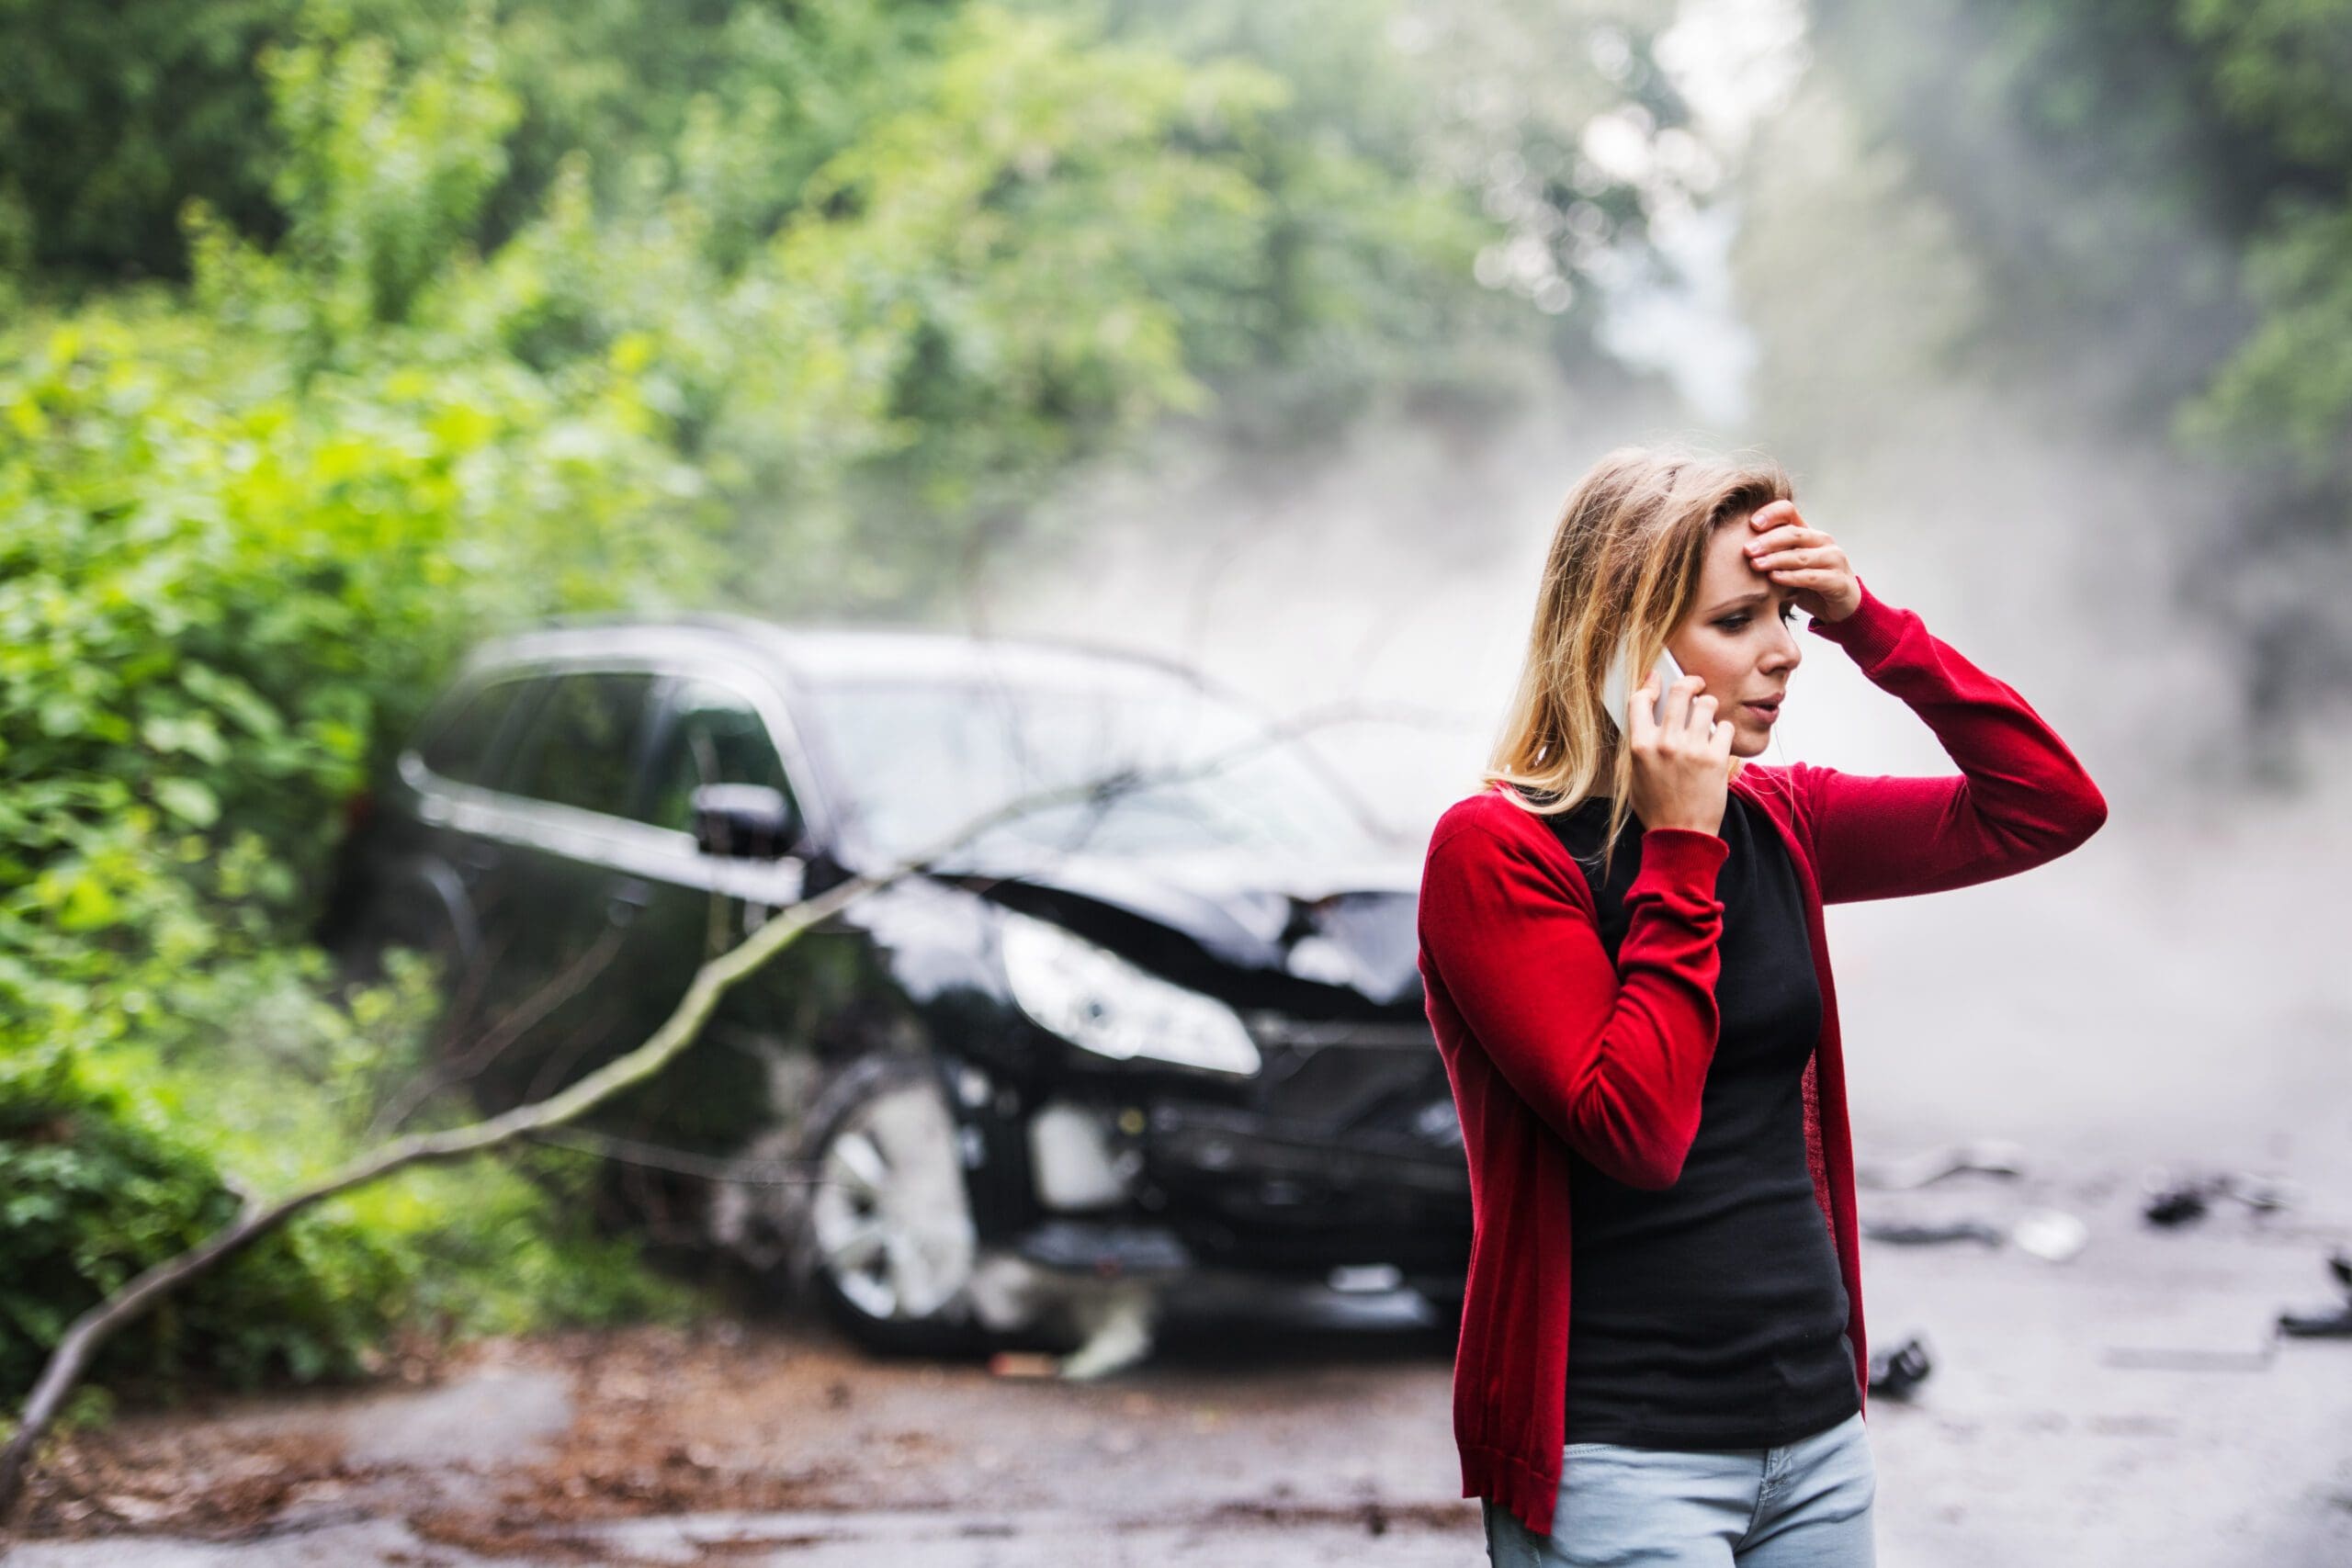 a-young-woman-with-smartphone-by-the-damaged-car-a-2021-08-26-12-09-13-utc-1-scaled.jpg